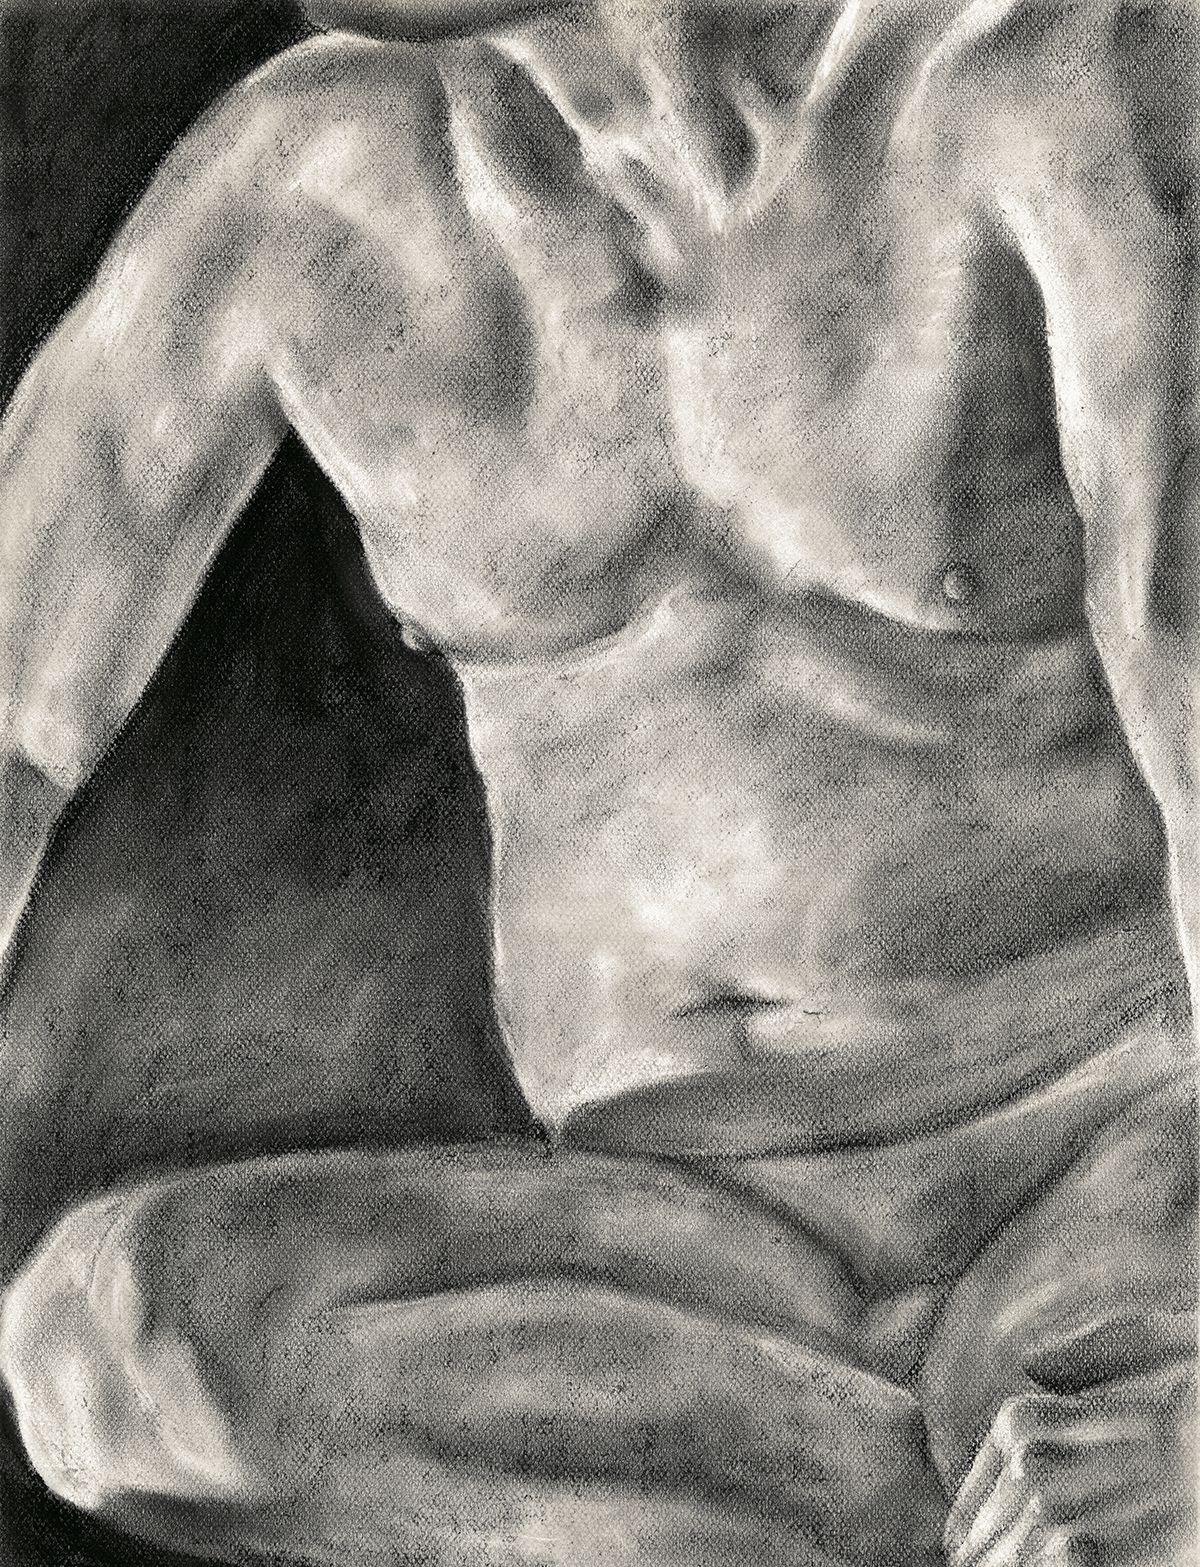 2019, Charcoal on paper, 25 ½ x 19 ½ in.